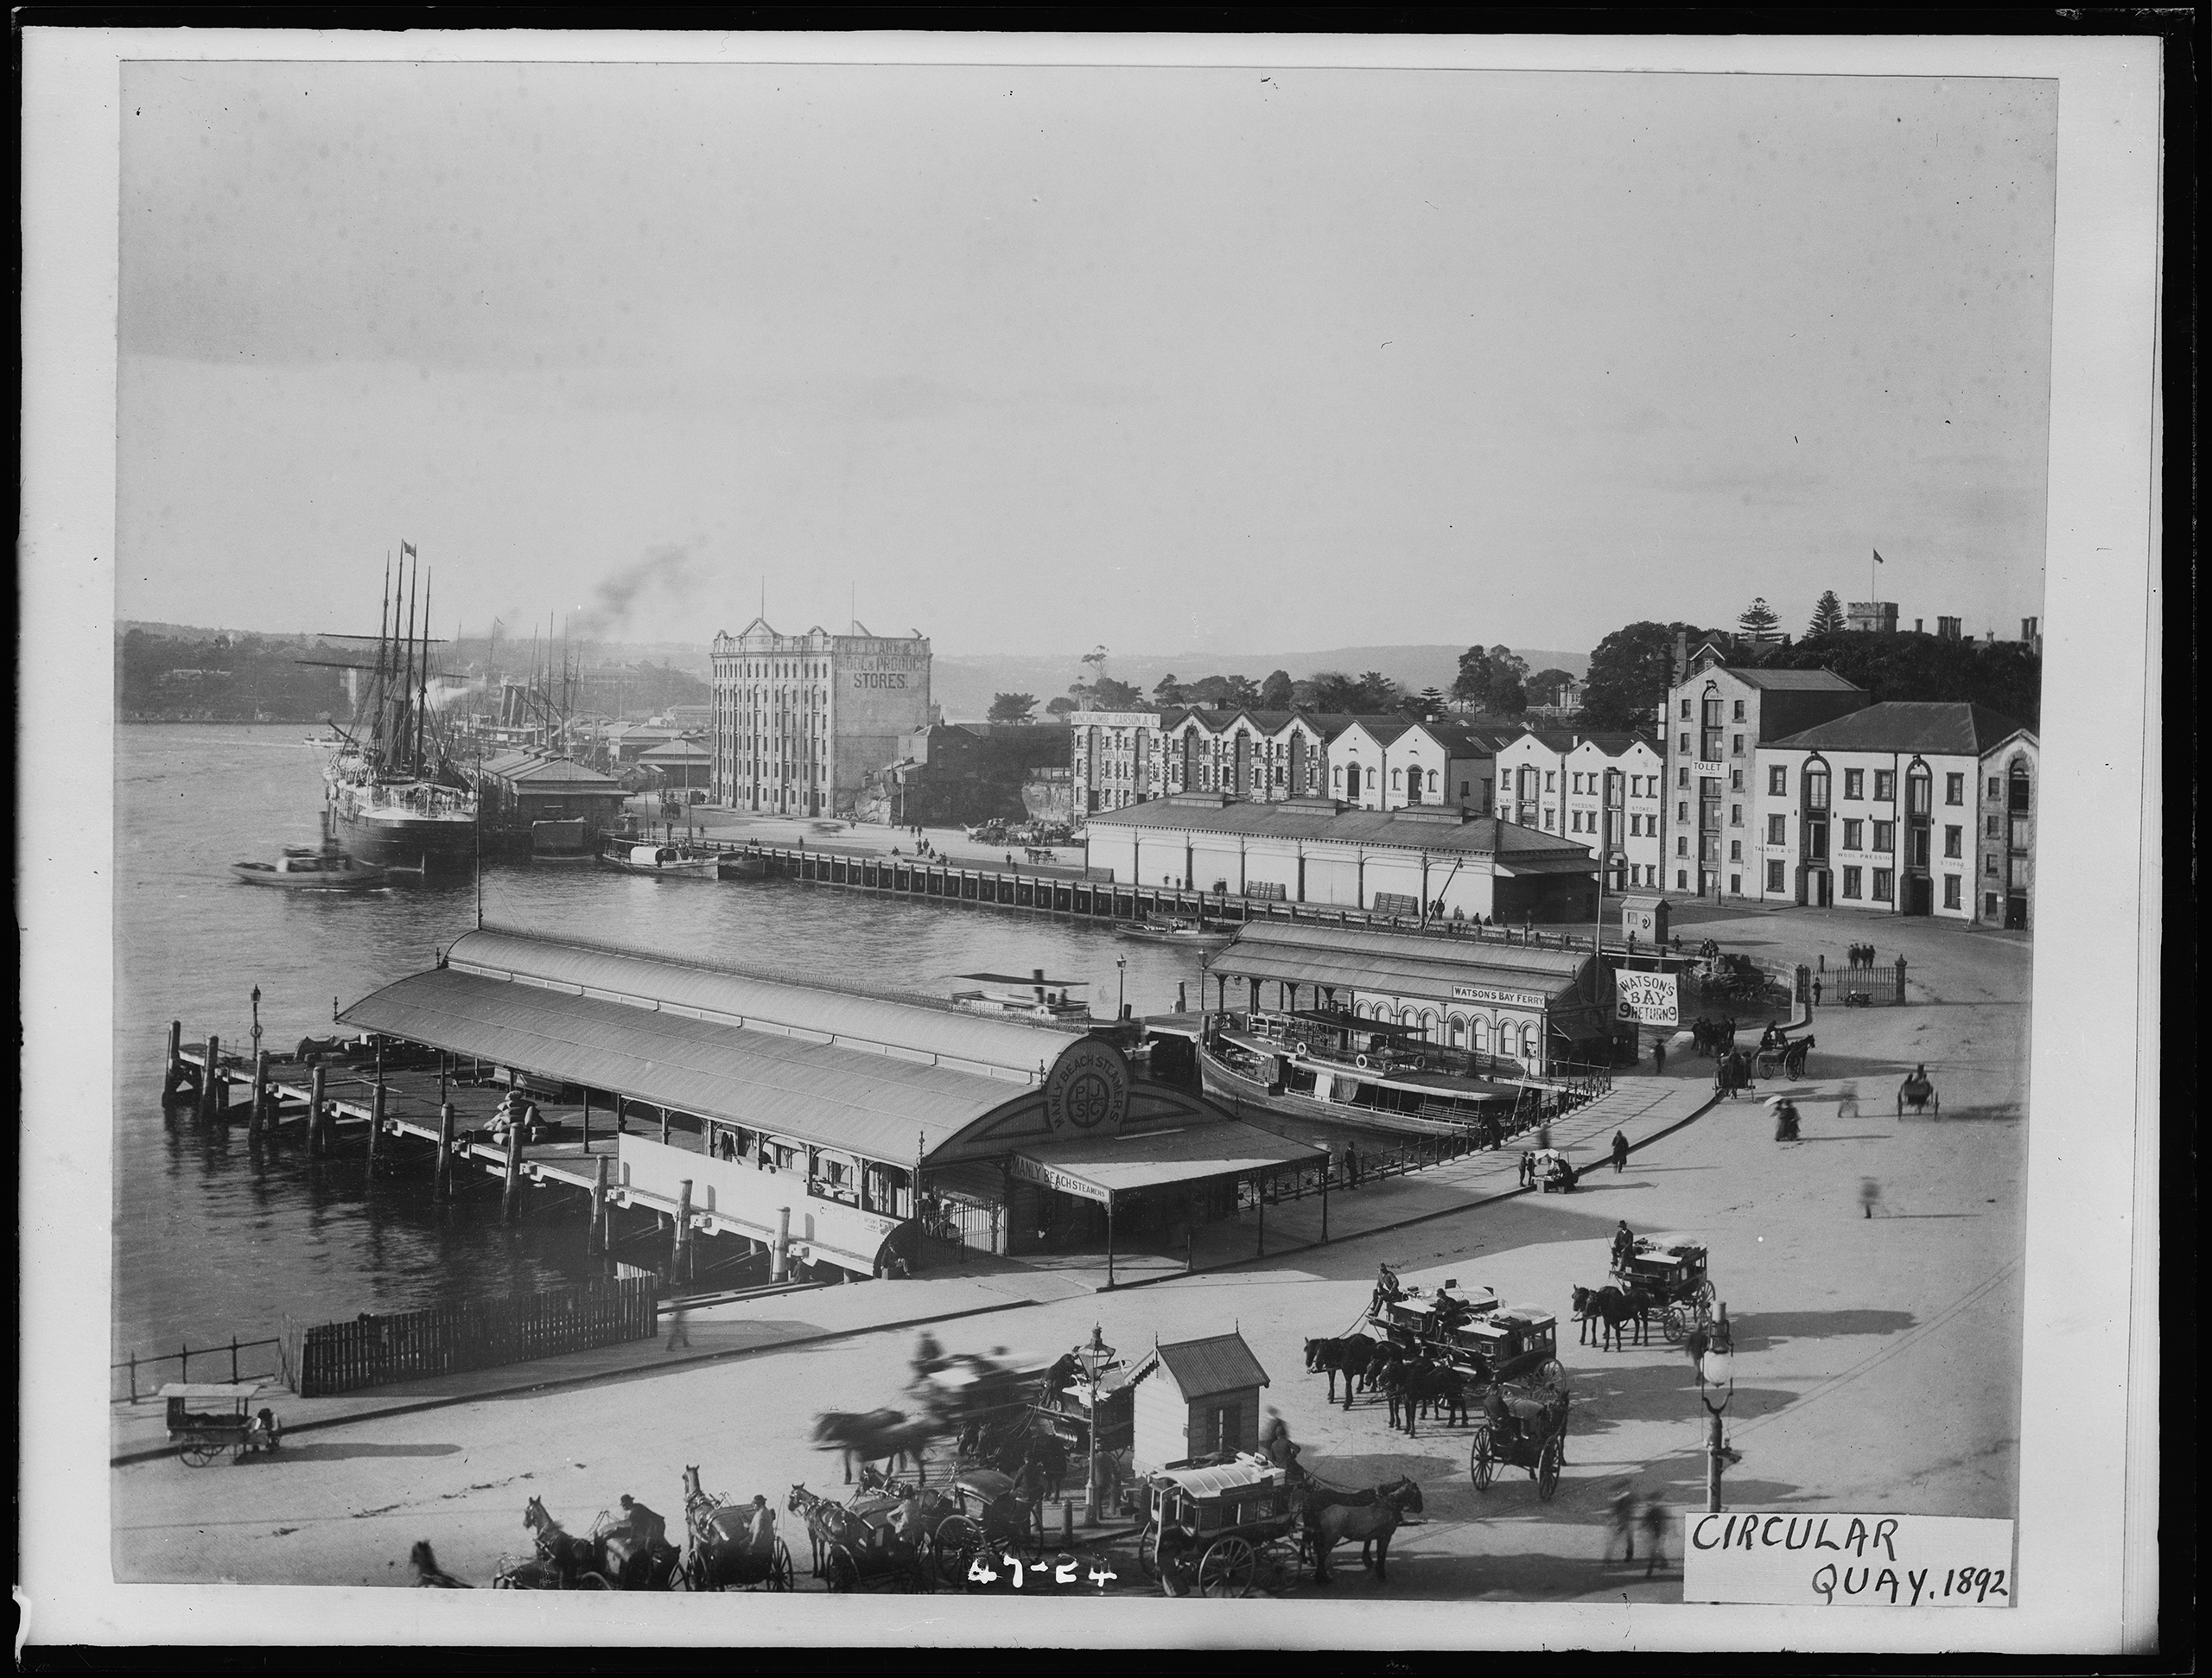 Glass plate negative of Sydney's Circular Quay showing wool stores and horse buses and hansom cabs in Alfred Street, 1892